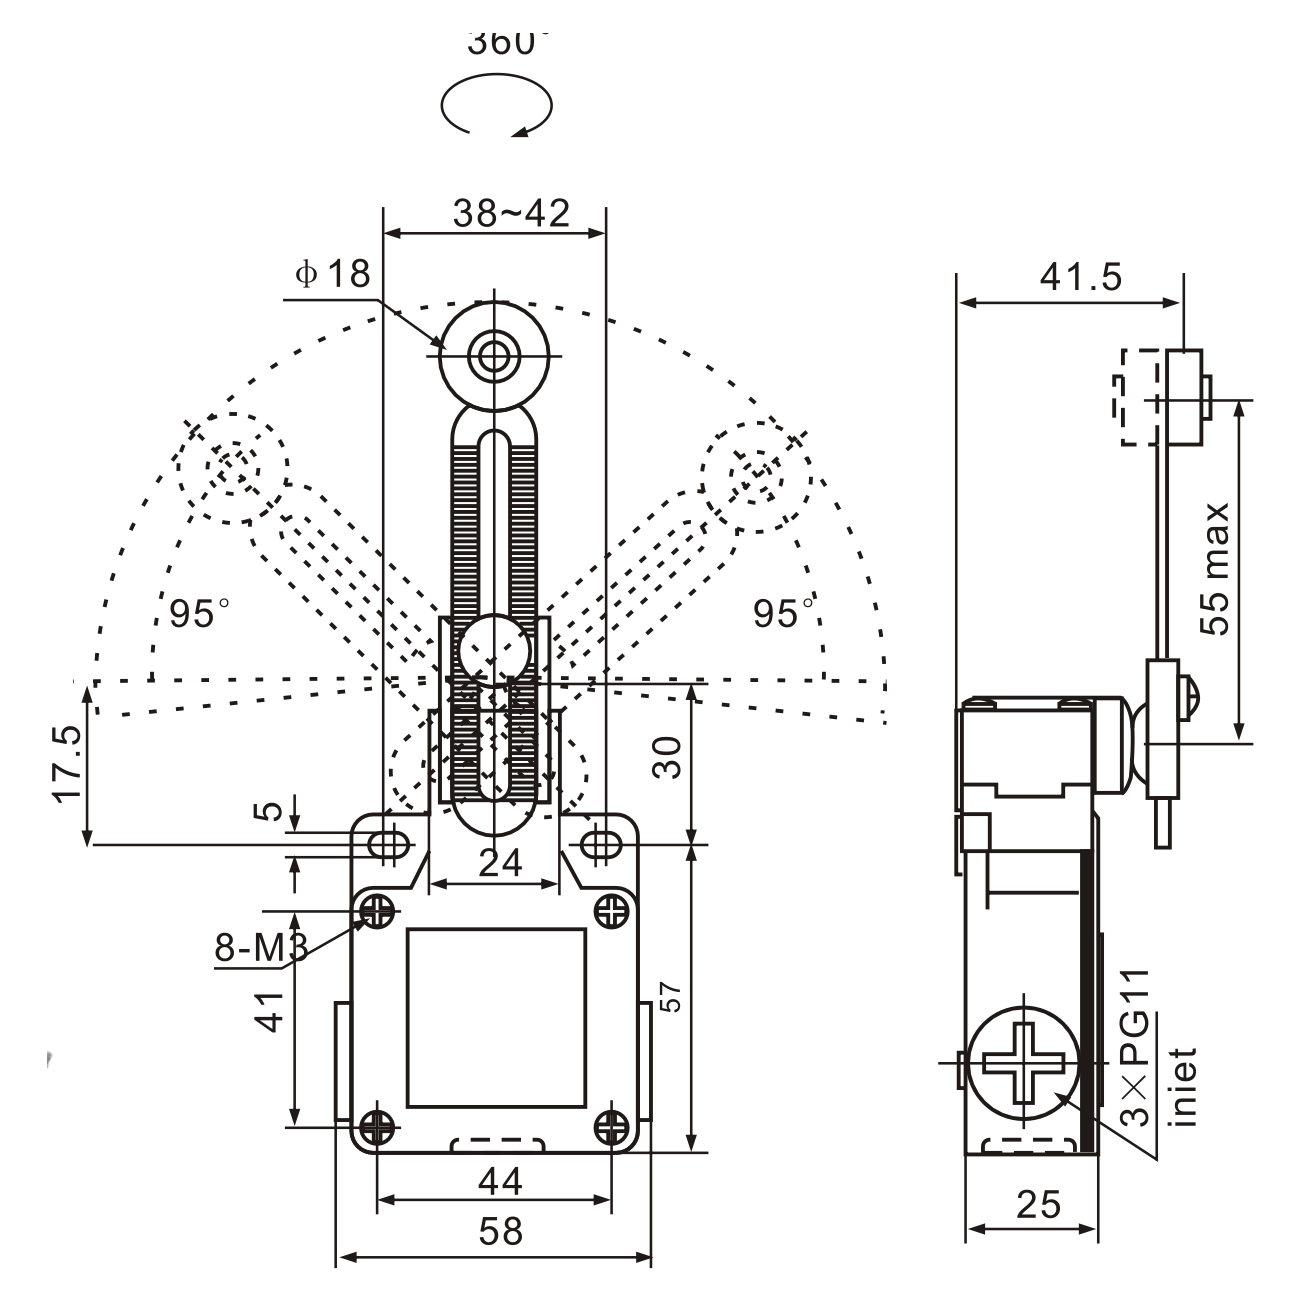 XCK-M141 Adjustable Arm with Roller Limit Switch Diagram